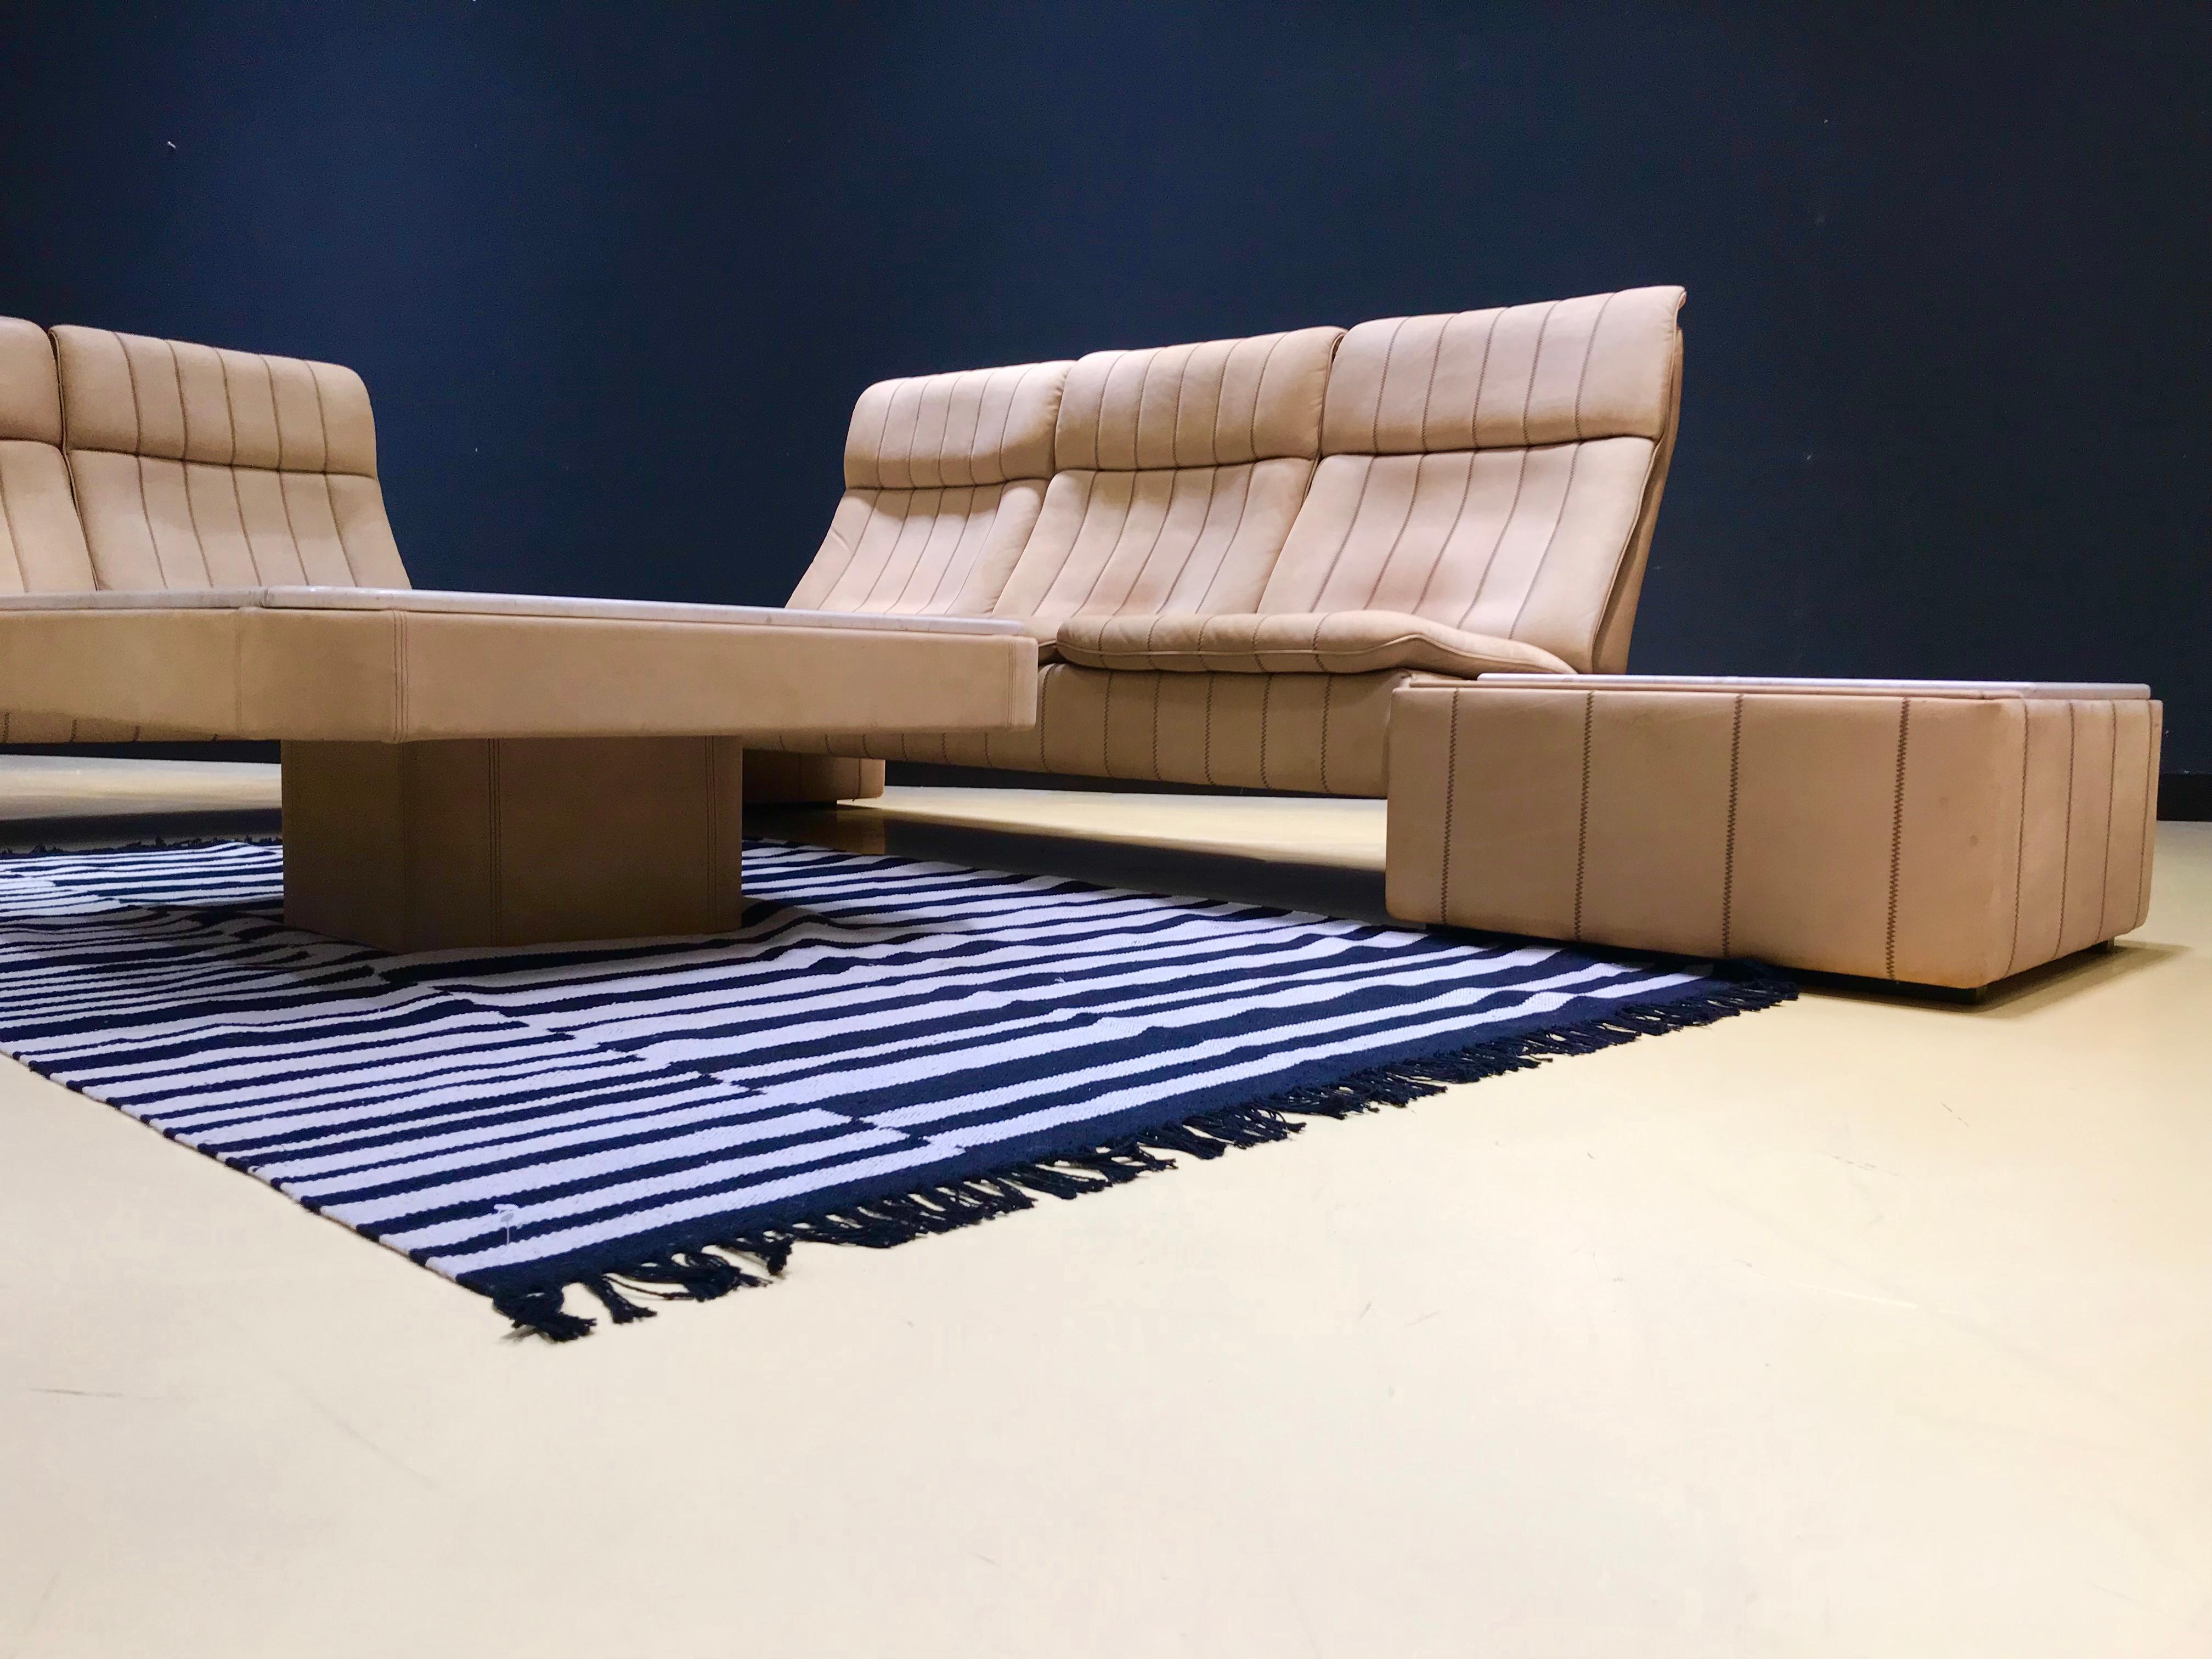 Handmade Swiss Neck-Leather Livingroom Set with Marble coffeetables by De Sede In Good Condition For Sale In Eindhoven, Netherlands